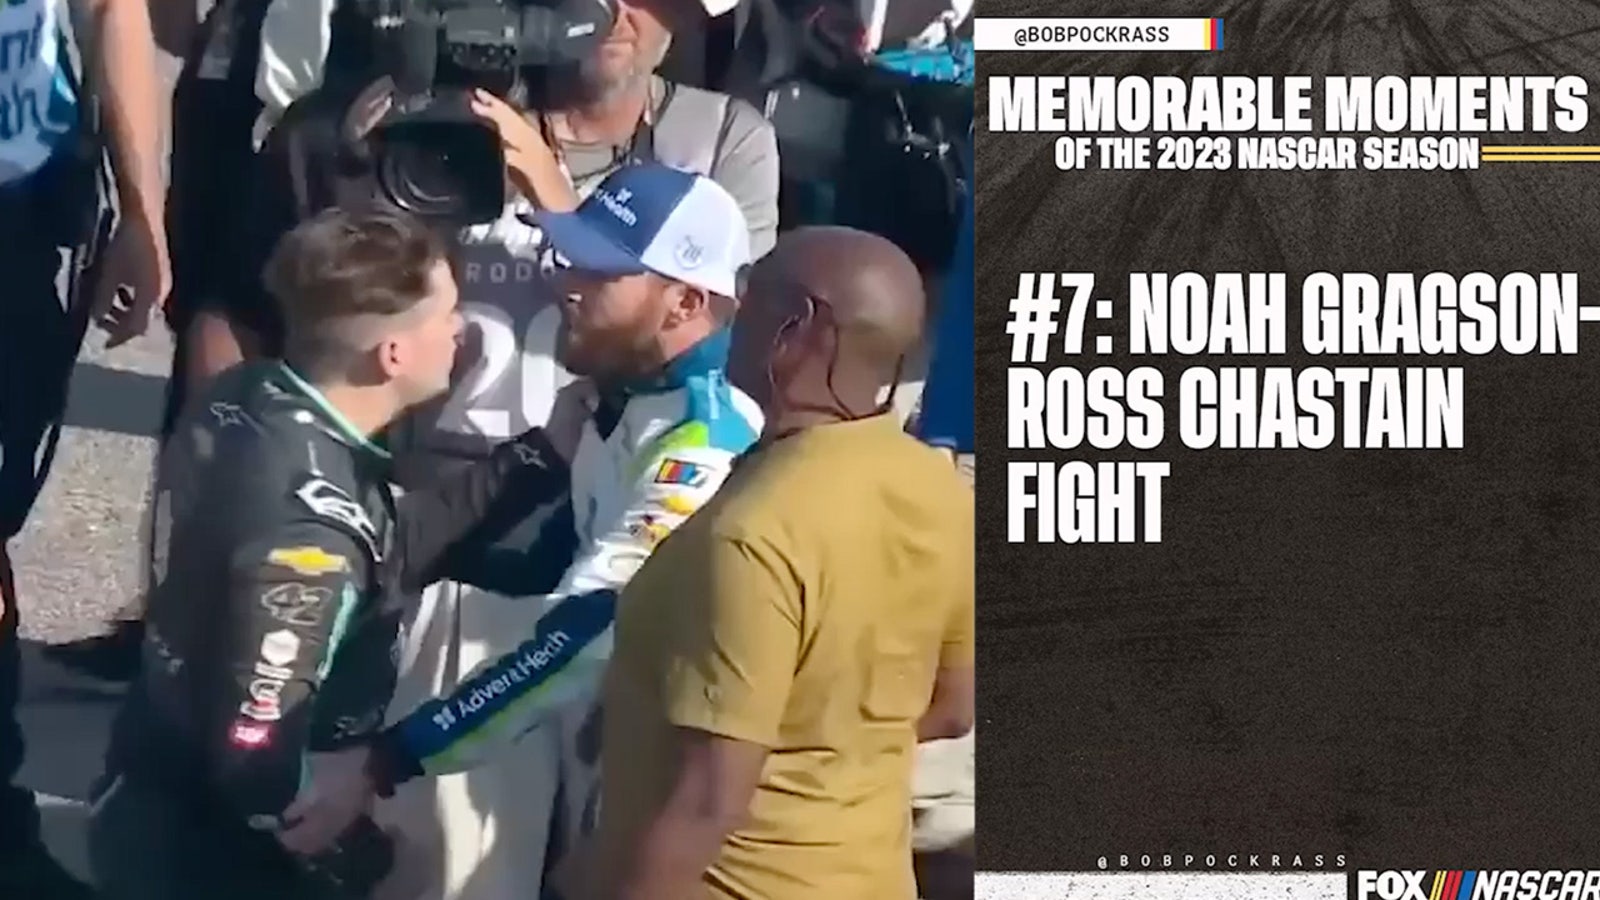 Noah Gragson-Ross Chastain fight | Most Memorable Moments of the 2023 NASCAR Season